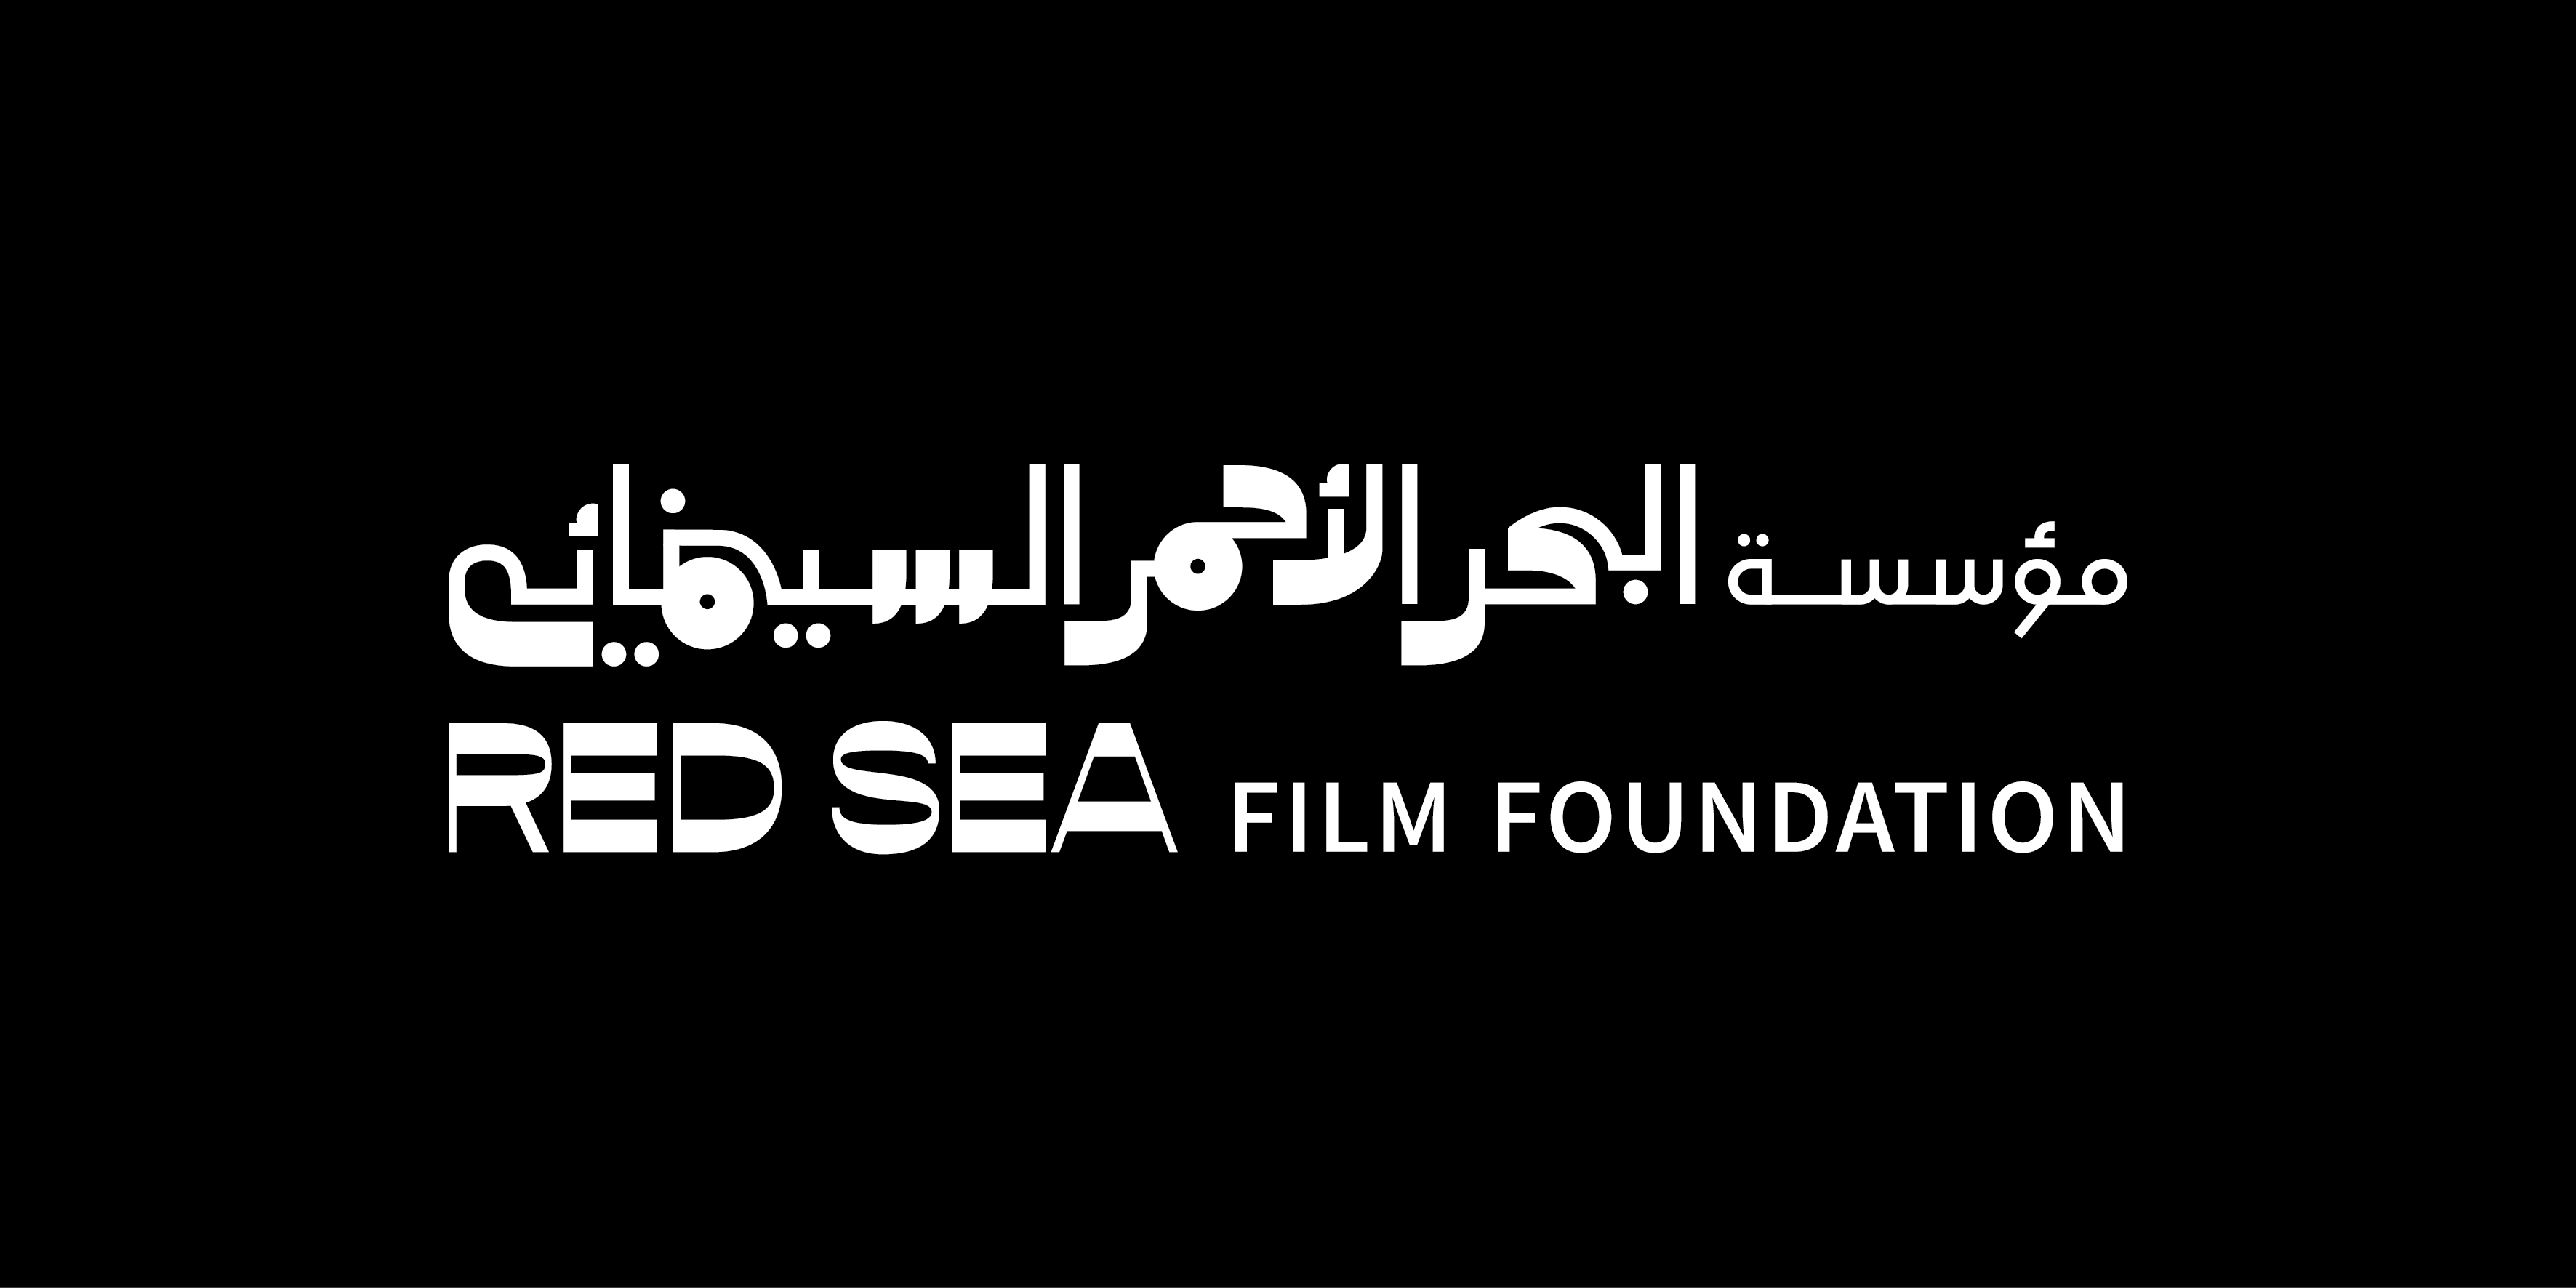 The Red Sea Film Foundation